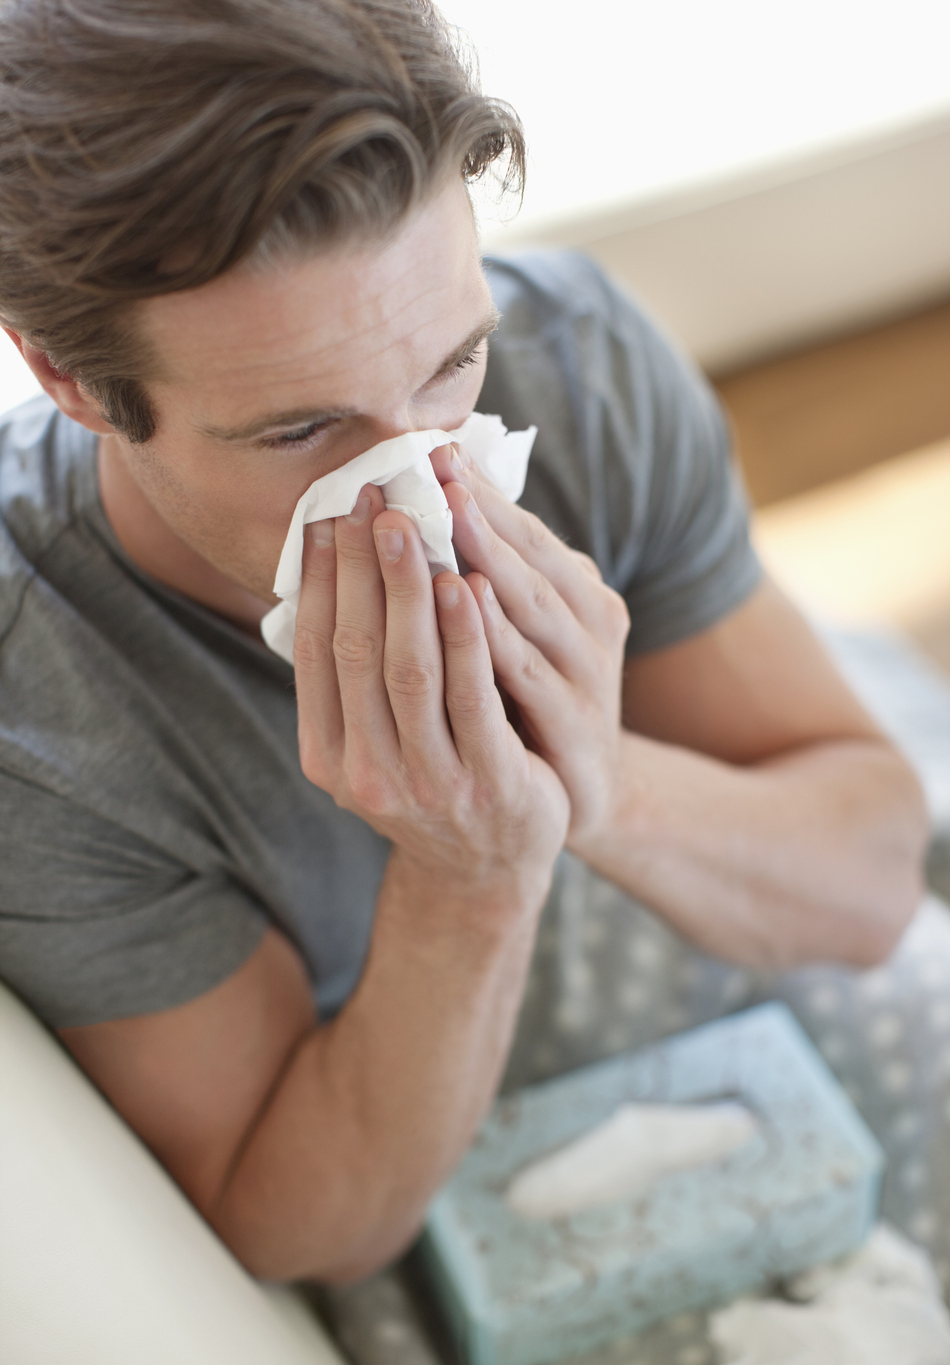 What is the Best Way to Manage Your Allergy Symptoms?